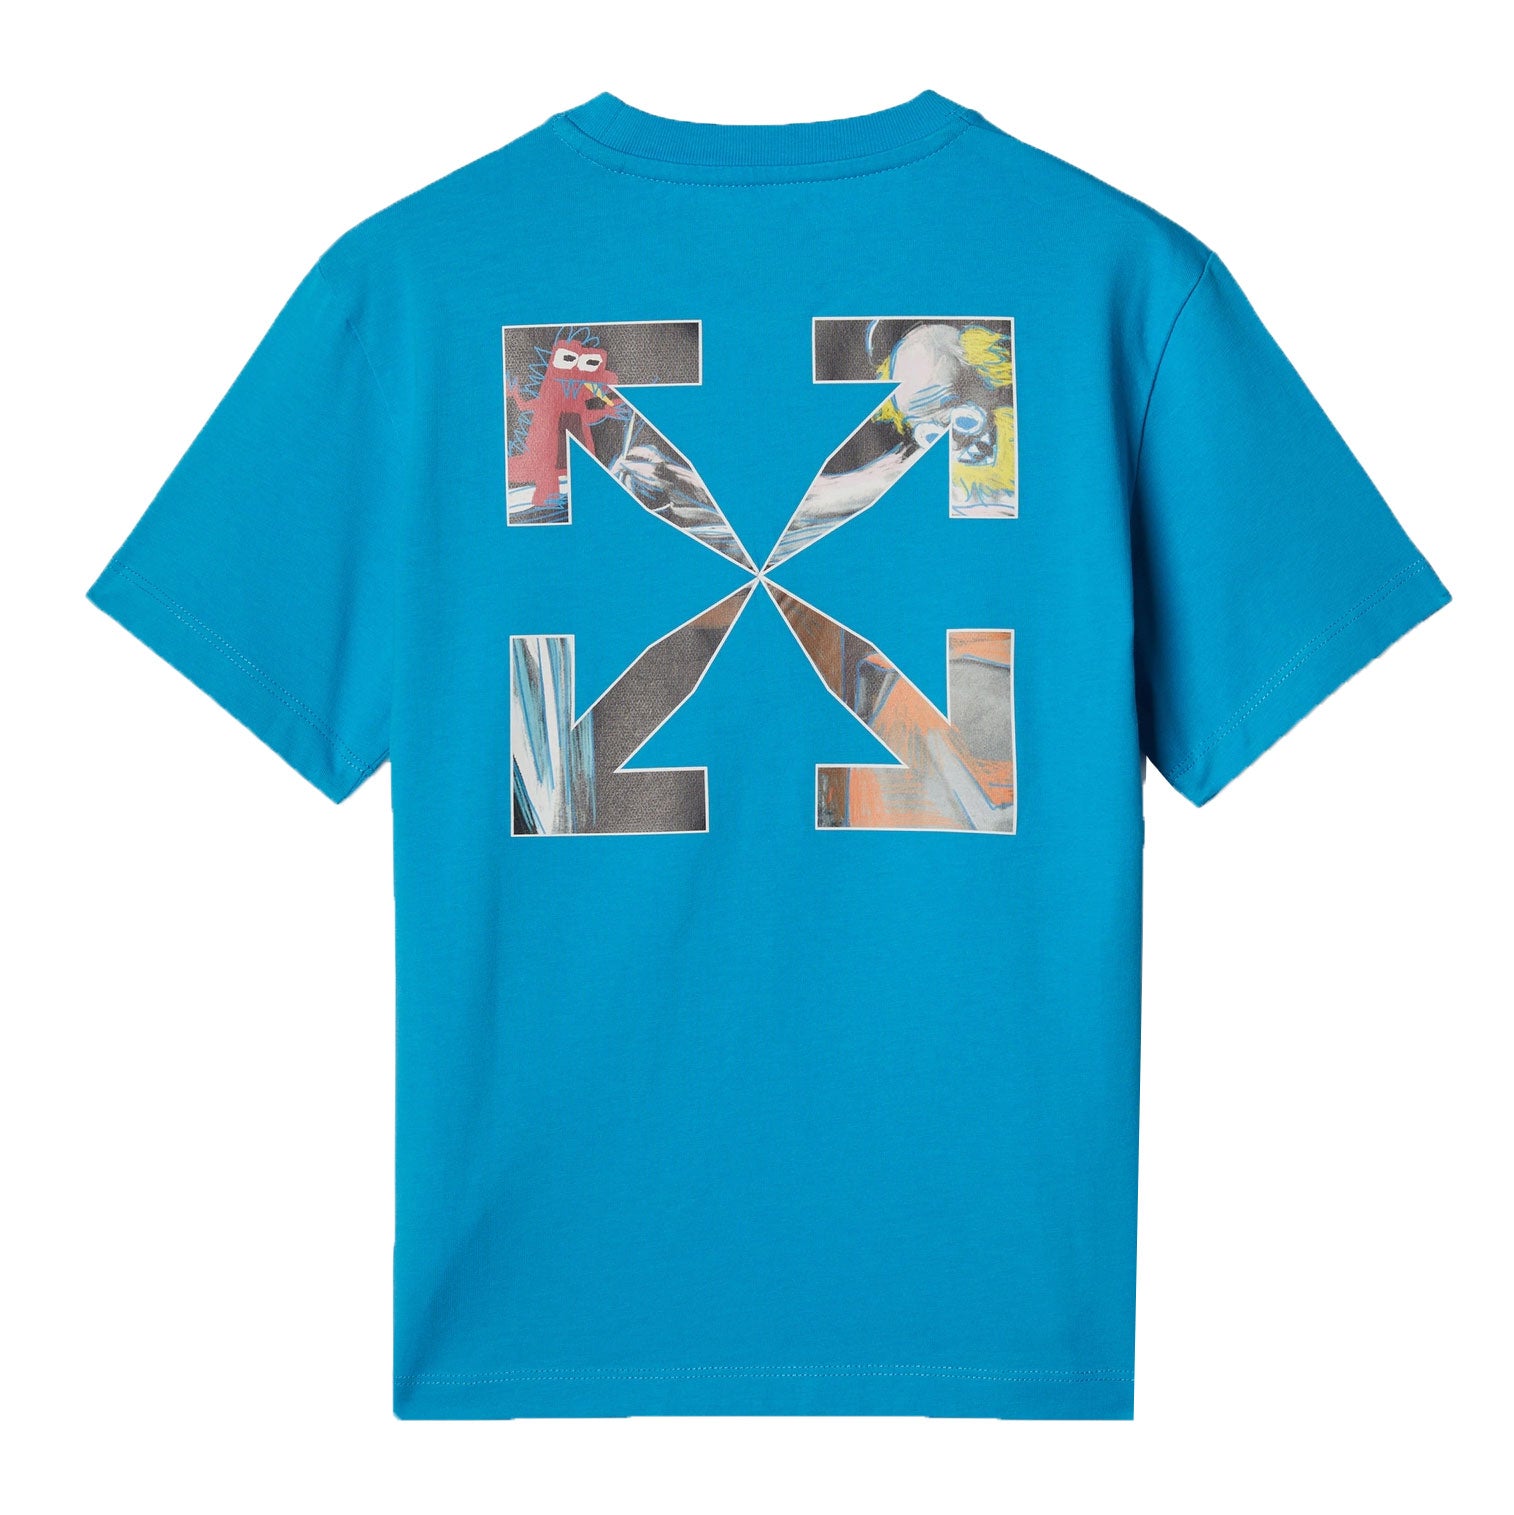 KIDS BALLOONS TEE S/S - BLUE W/ RED